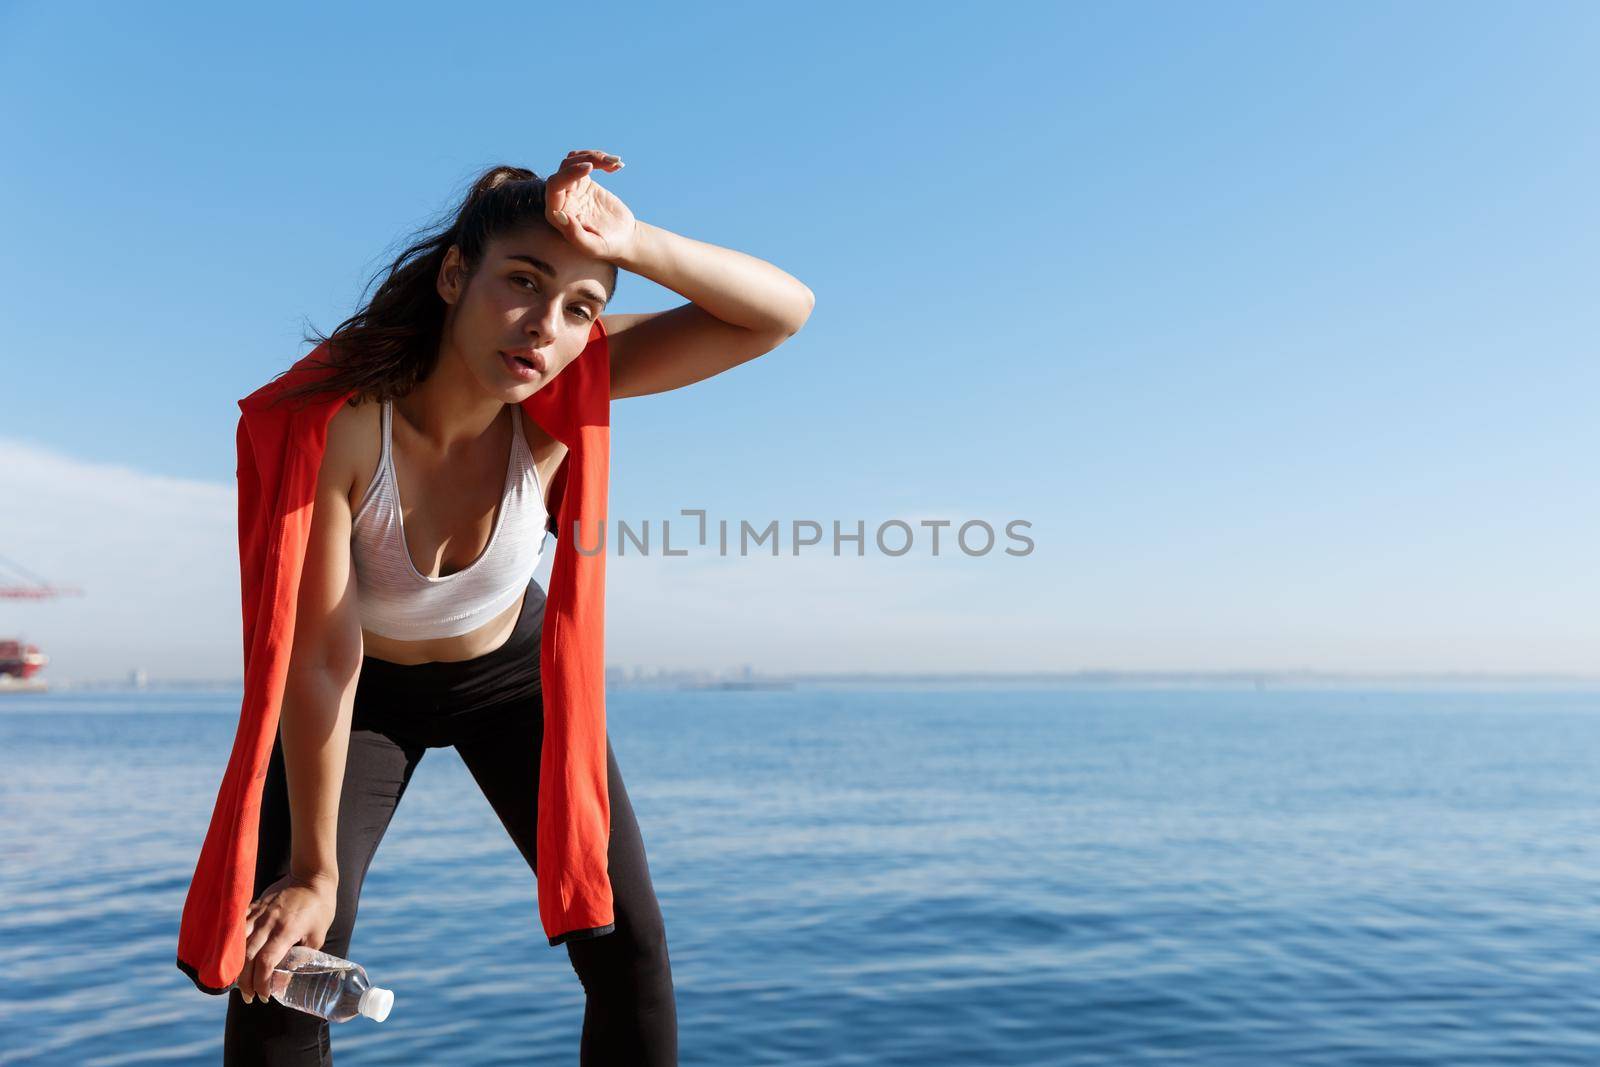 Outdoor shot of tired young sportswoman having a break near the sea, wiping sweat and panting after running.